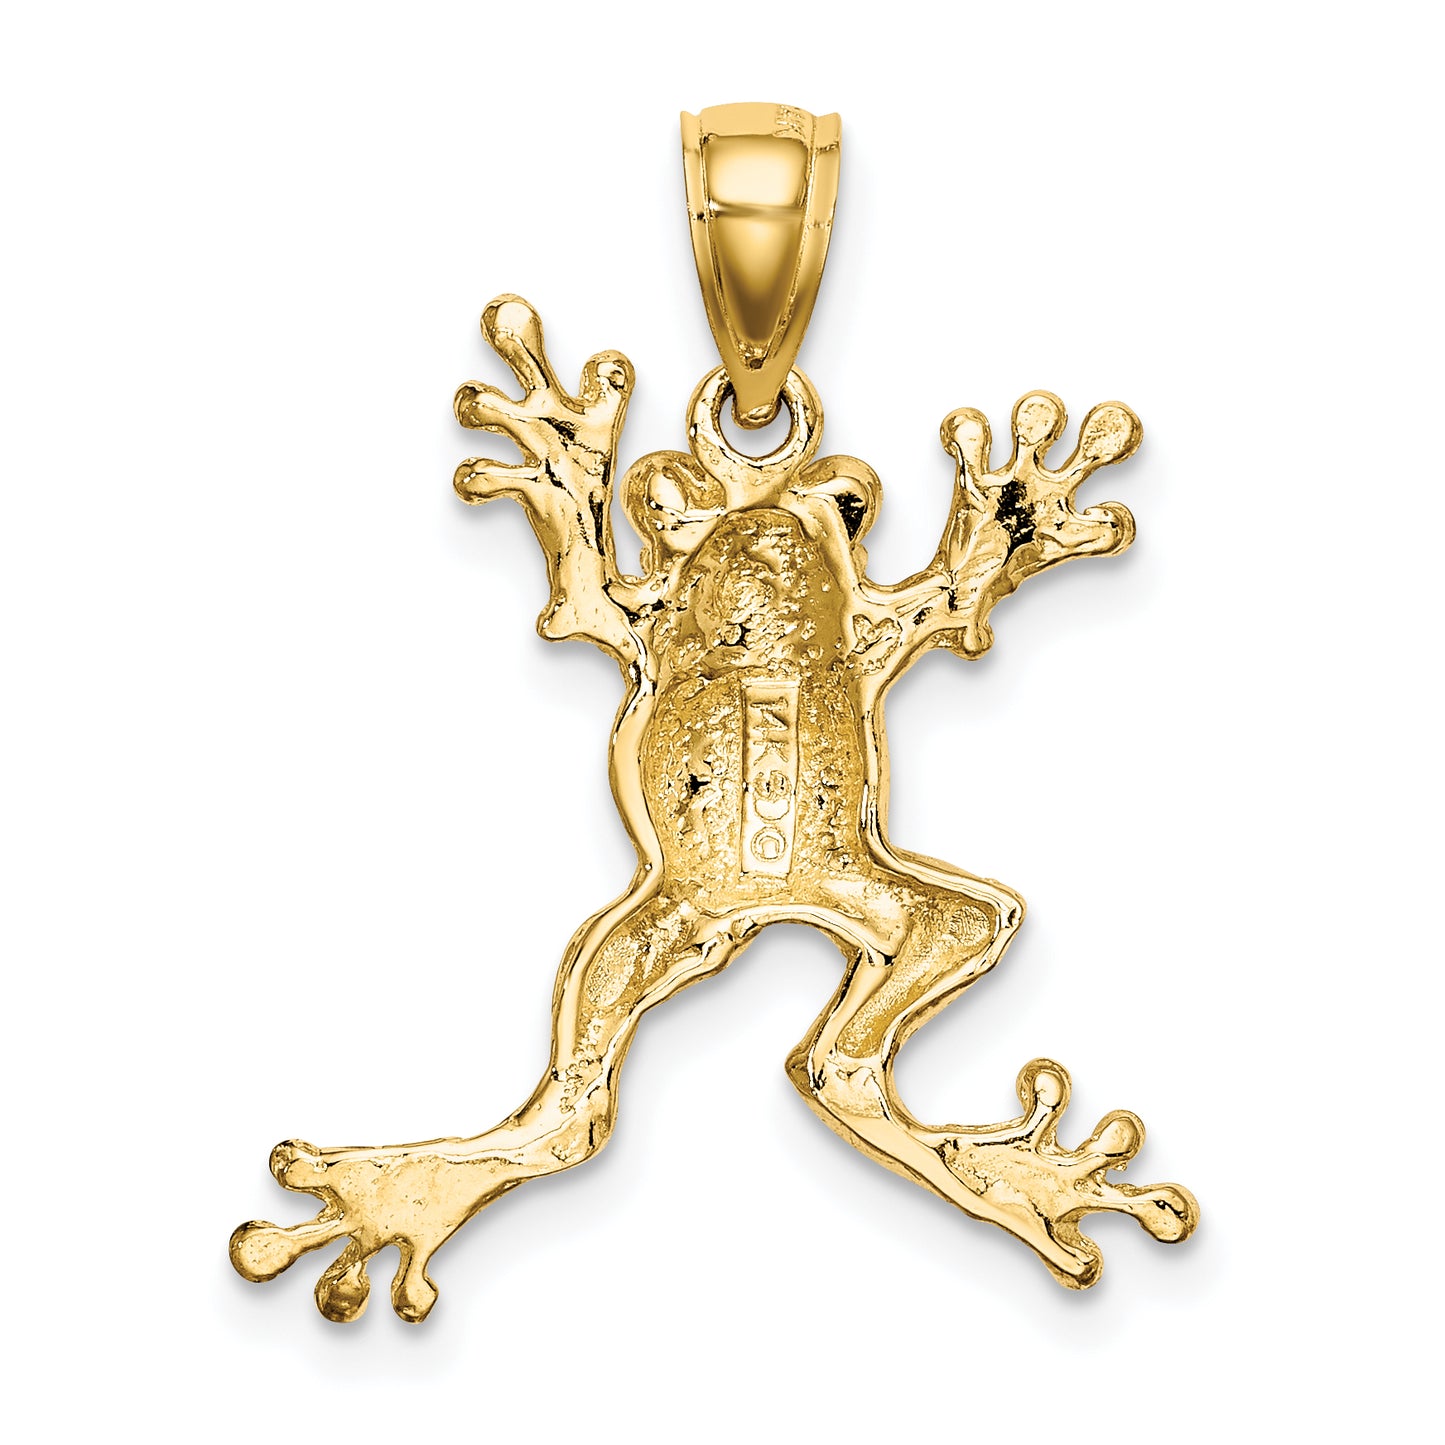 10K 2-D Frog with Pot Belly Charm